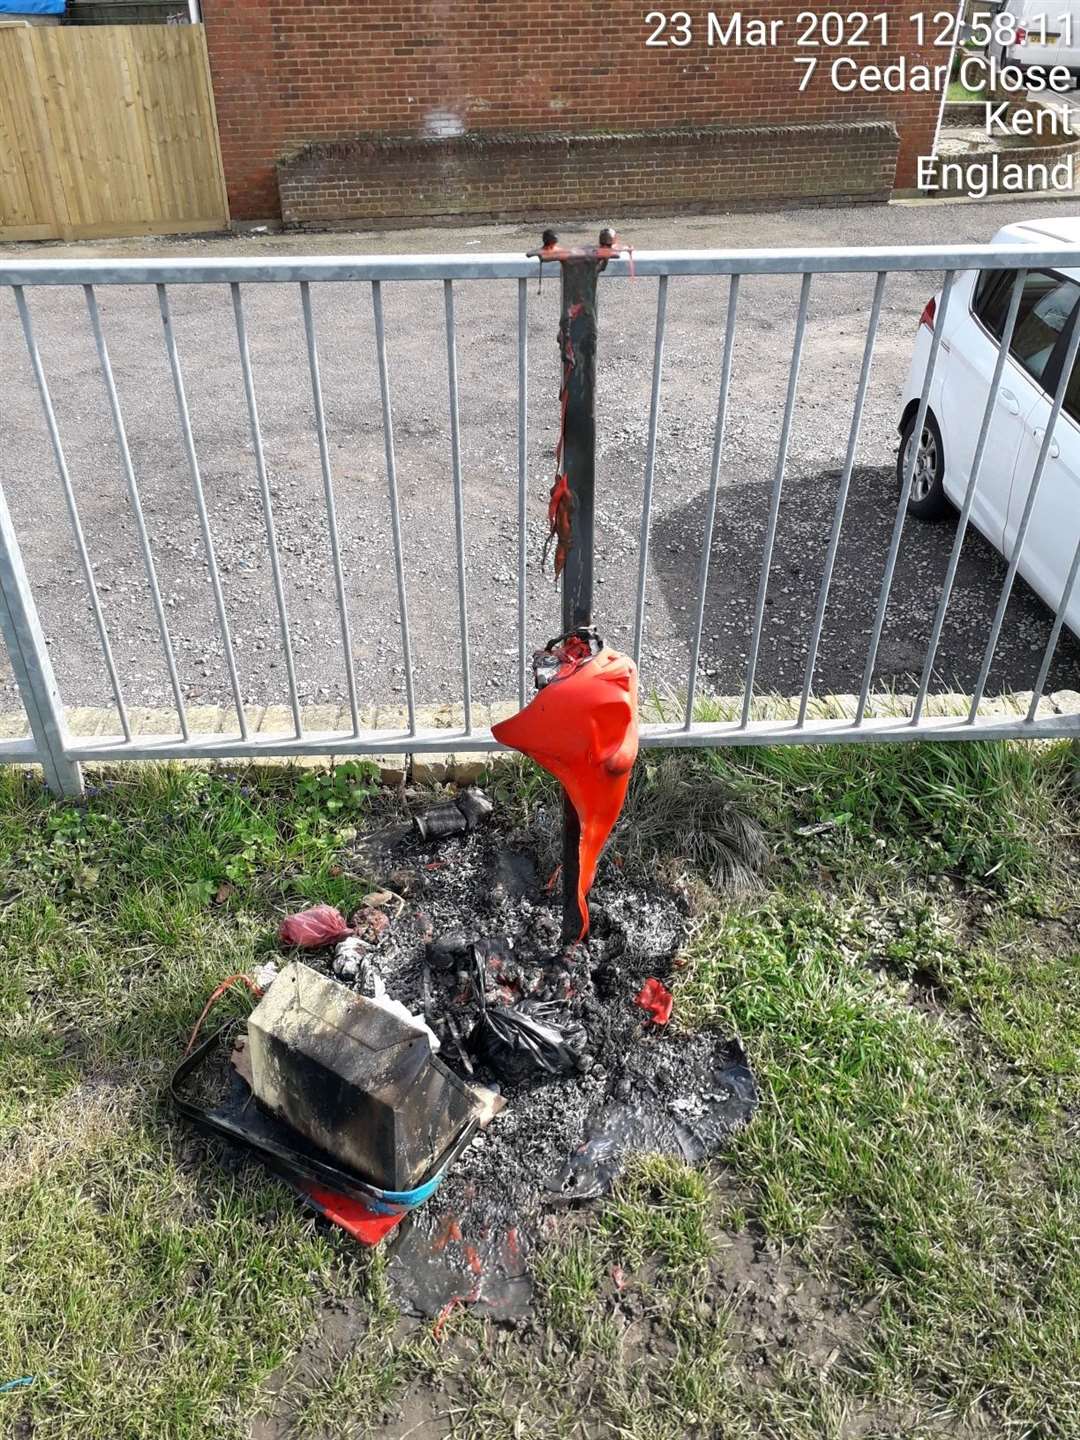 Two dog bins were set alight at playing fields in Sittingbourne. Picture: Swale council